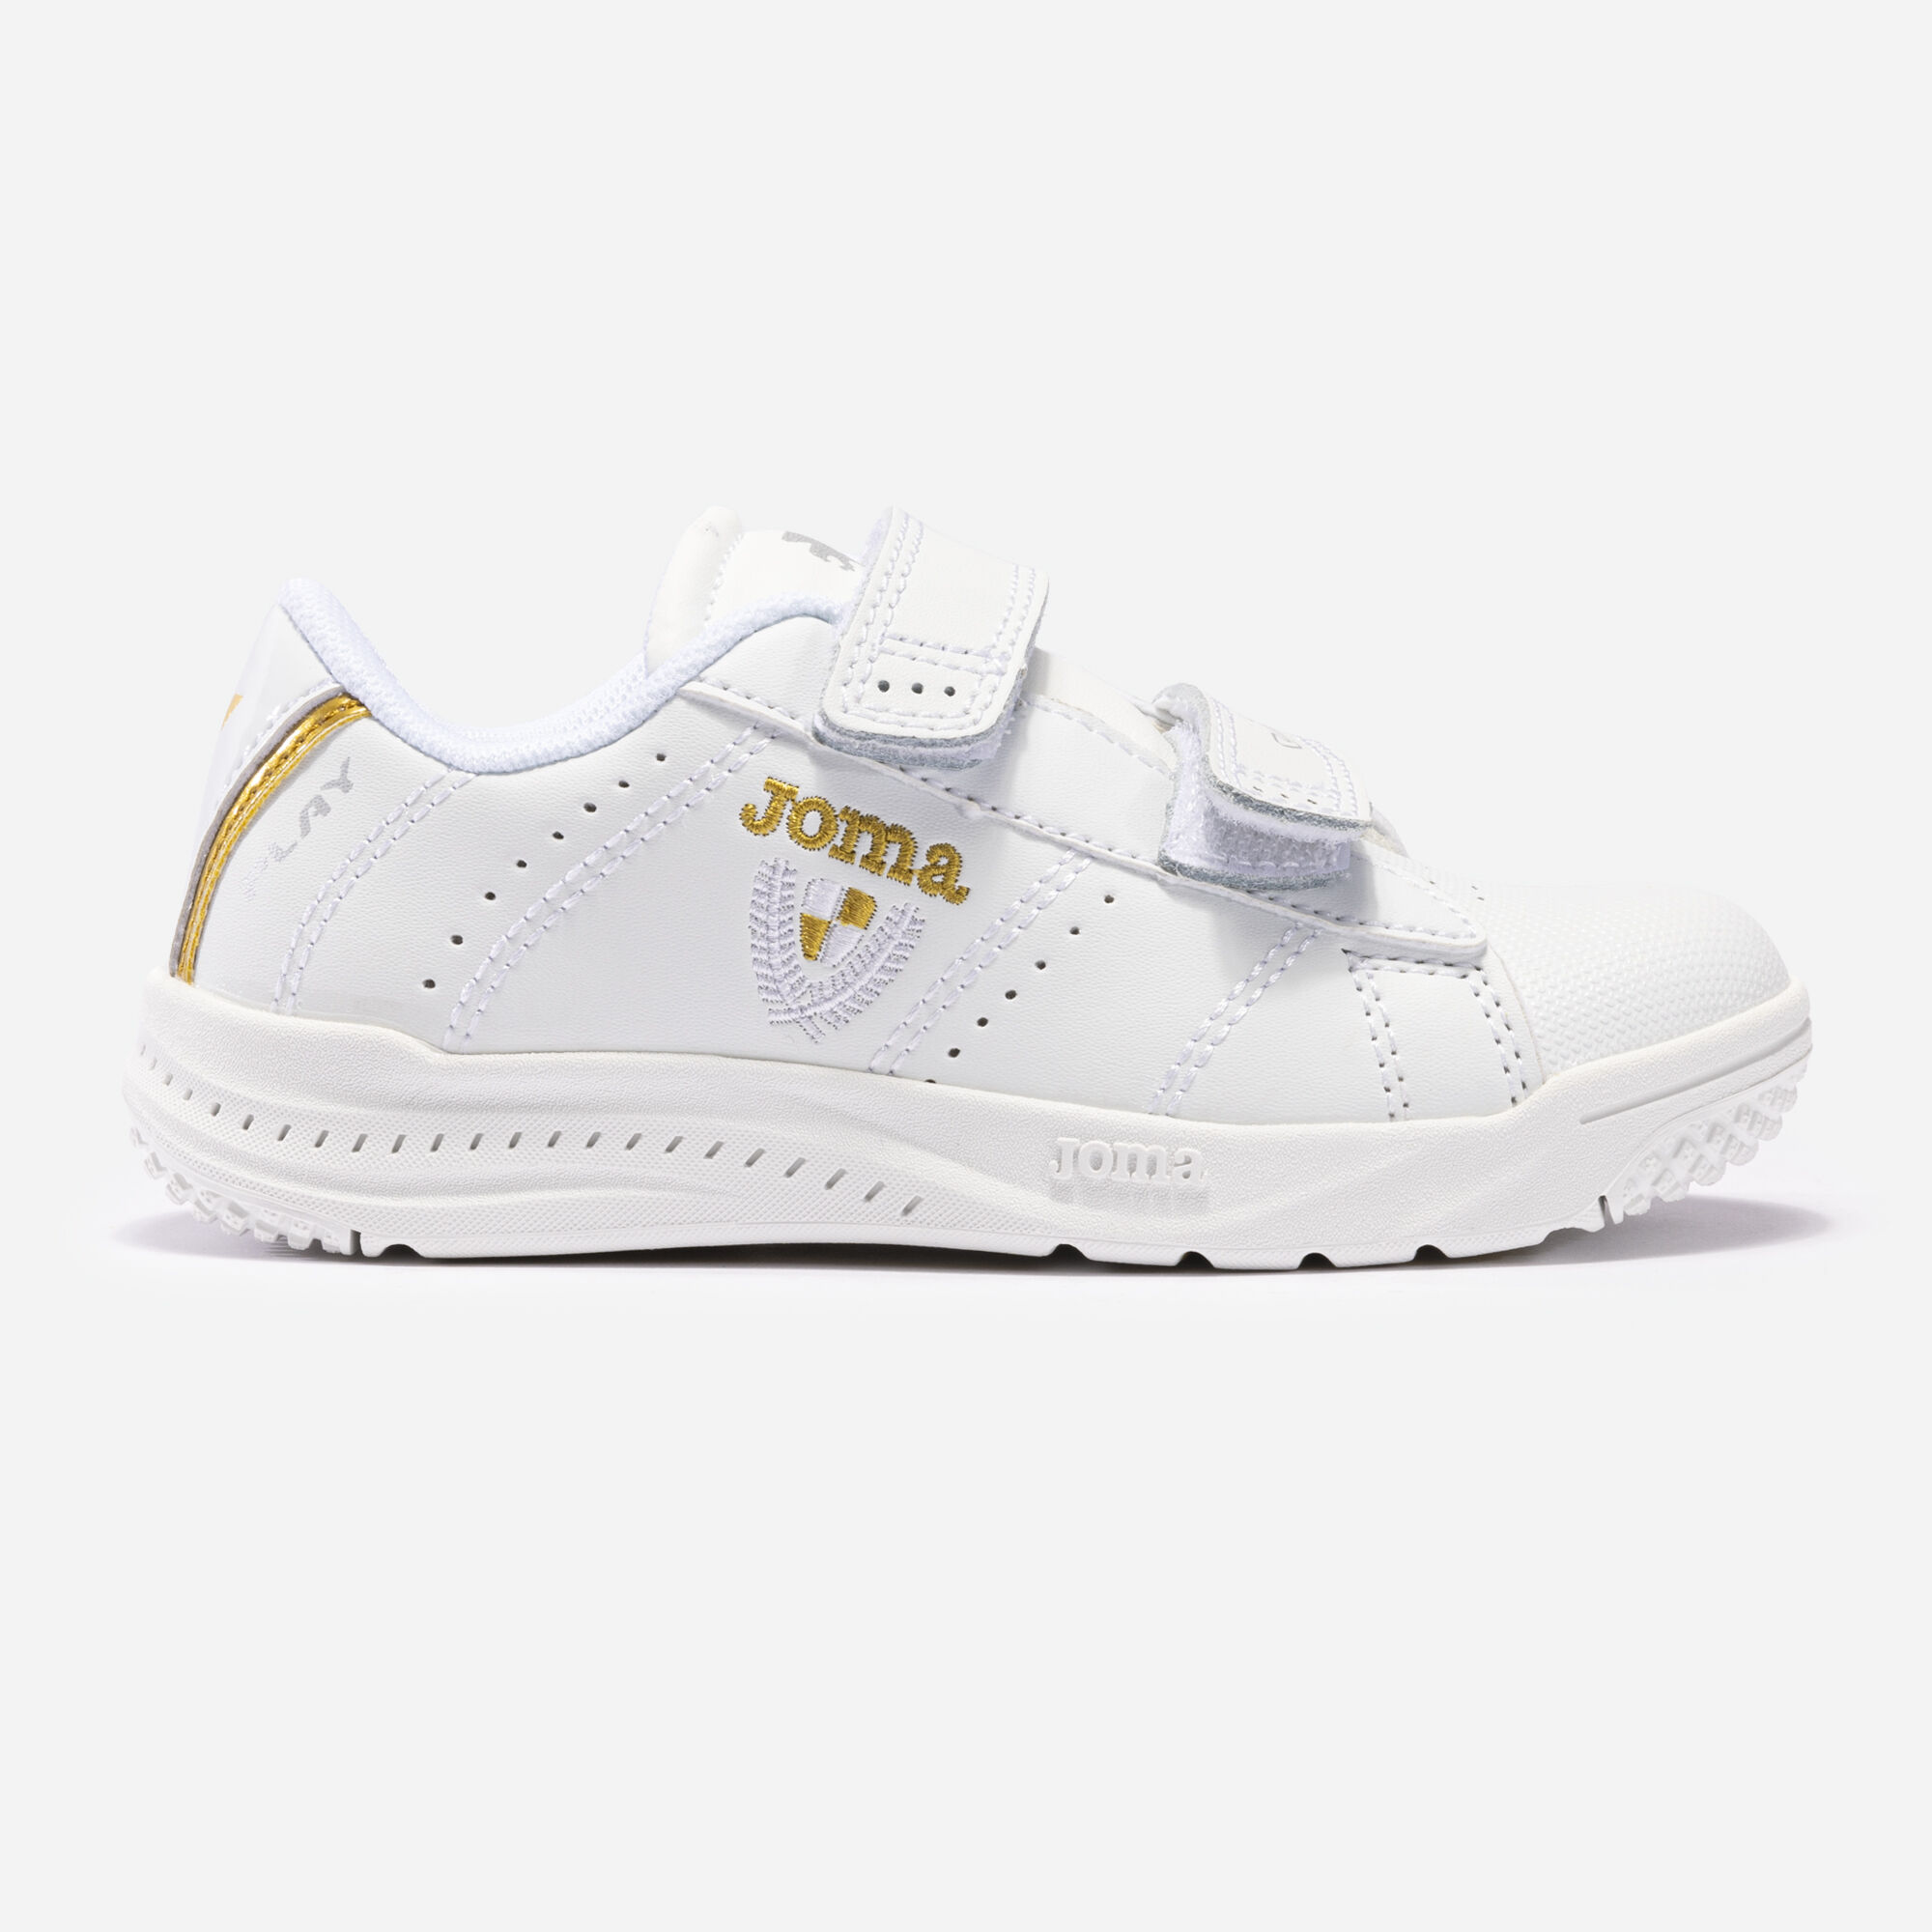 Chaussures casual Play 22 junior blanc or